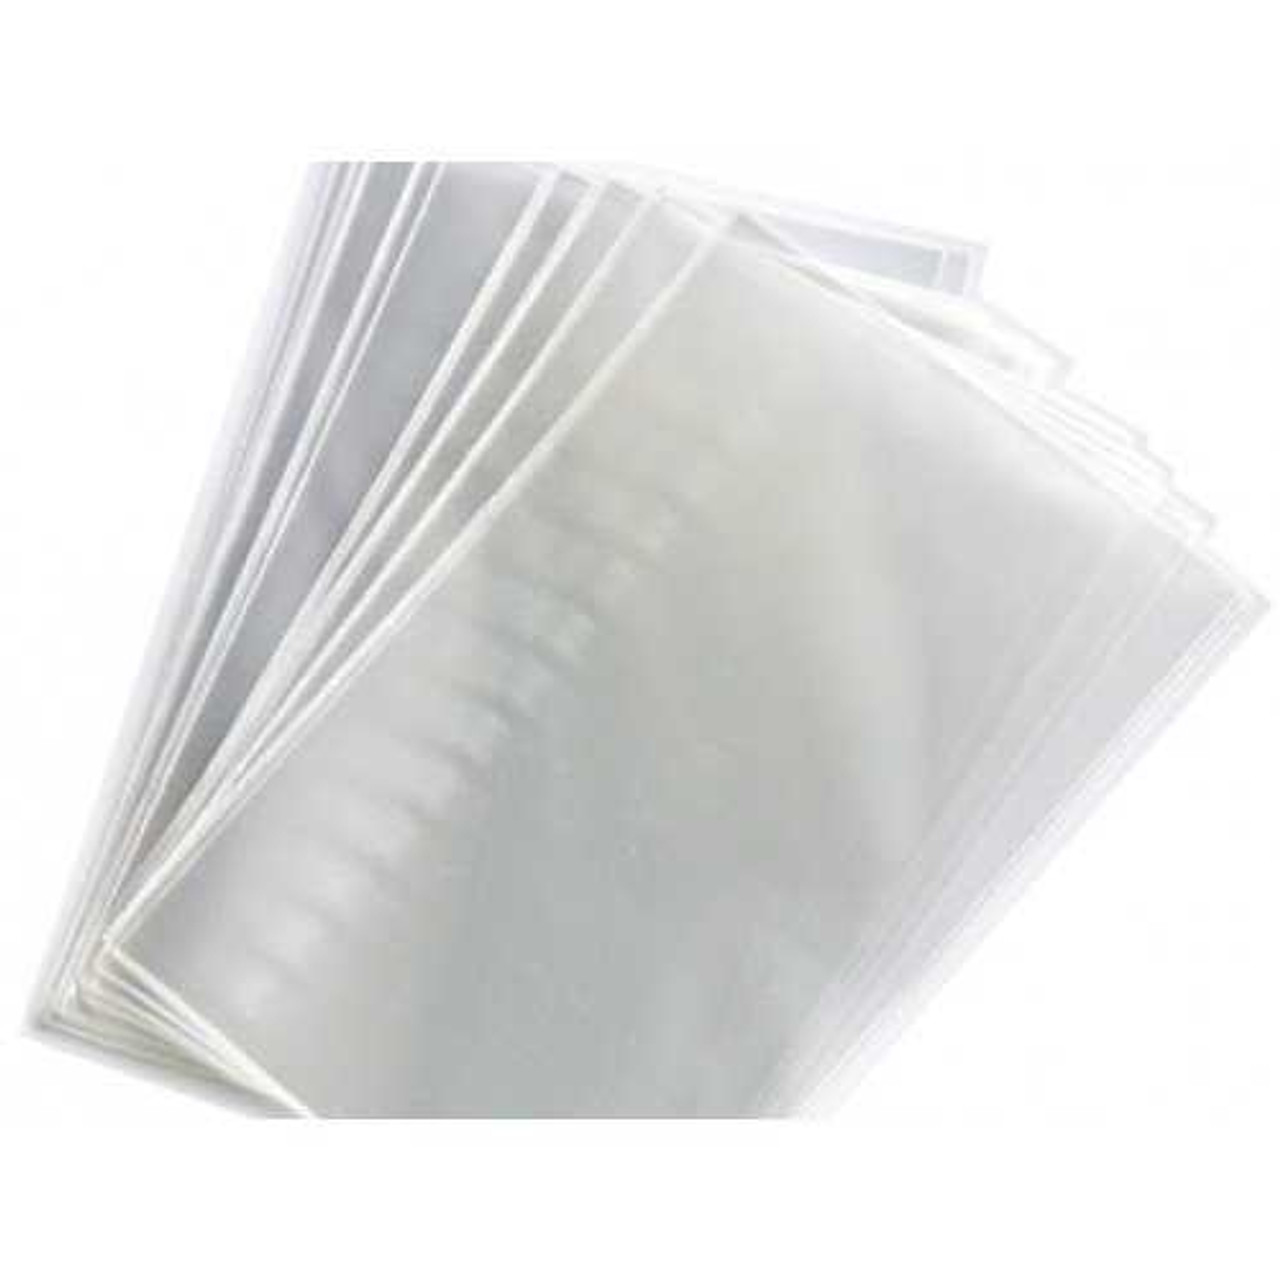 Clear Plastic Bag Polyethylene Bags Crystal Clear Flat 1 Mil for Food  Contact, Acid-Free, Archival Safe (Pack of 100)